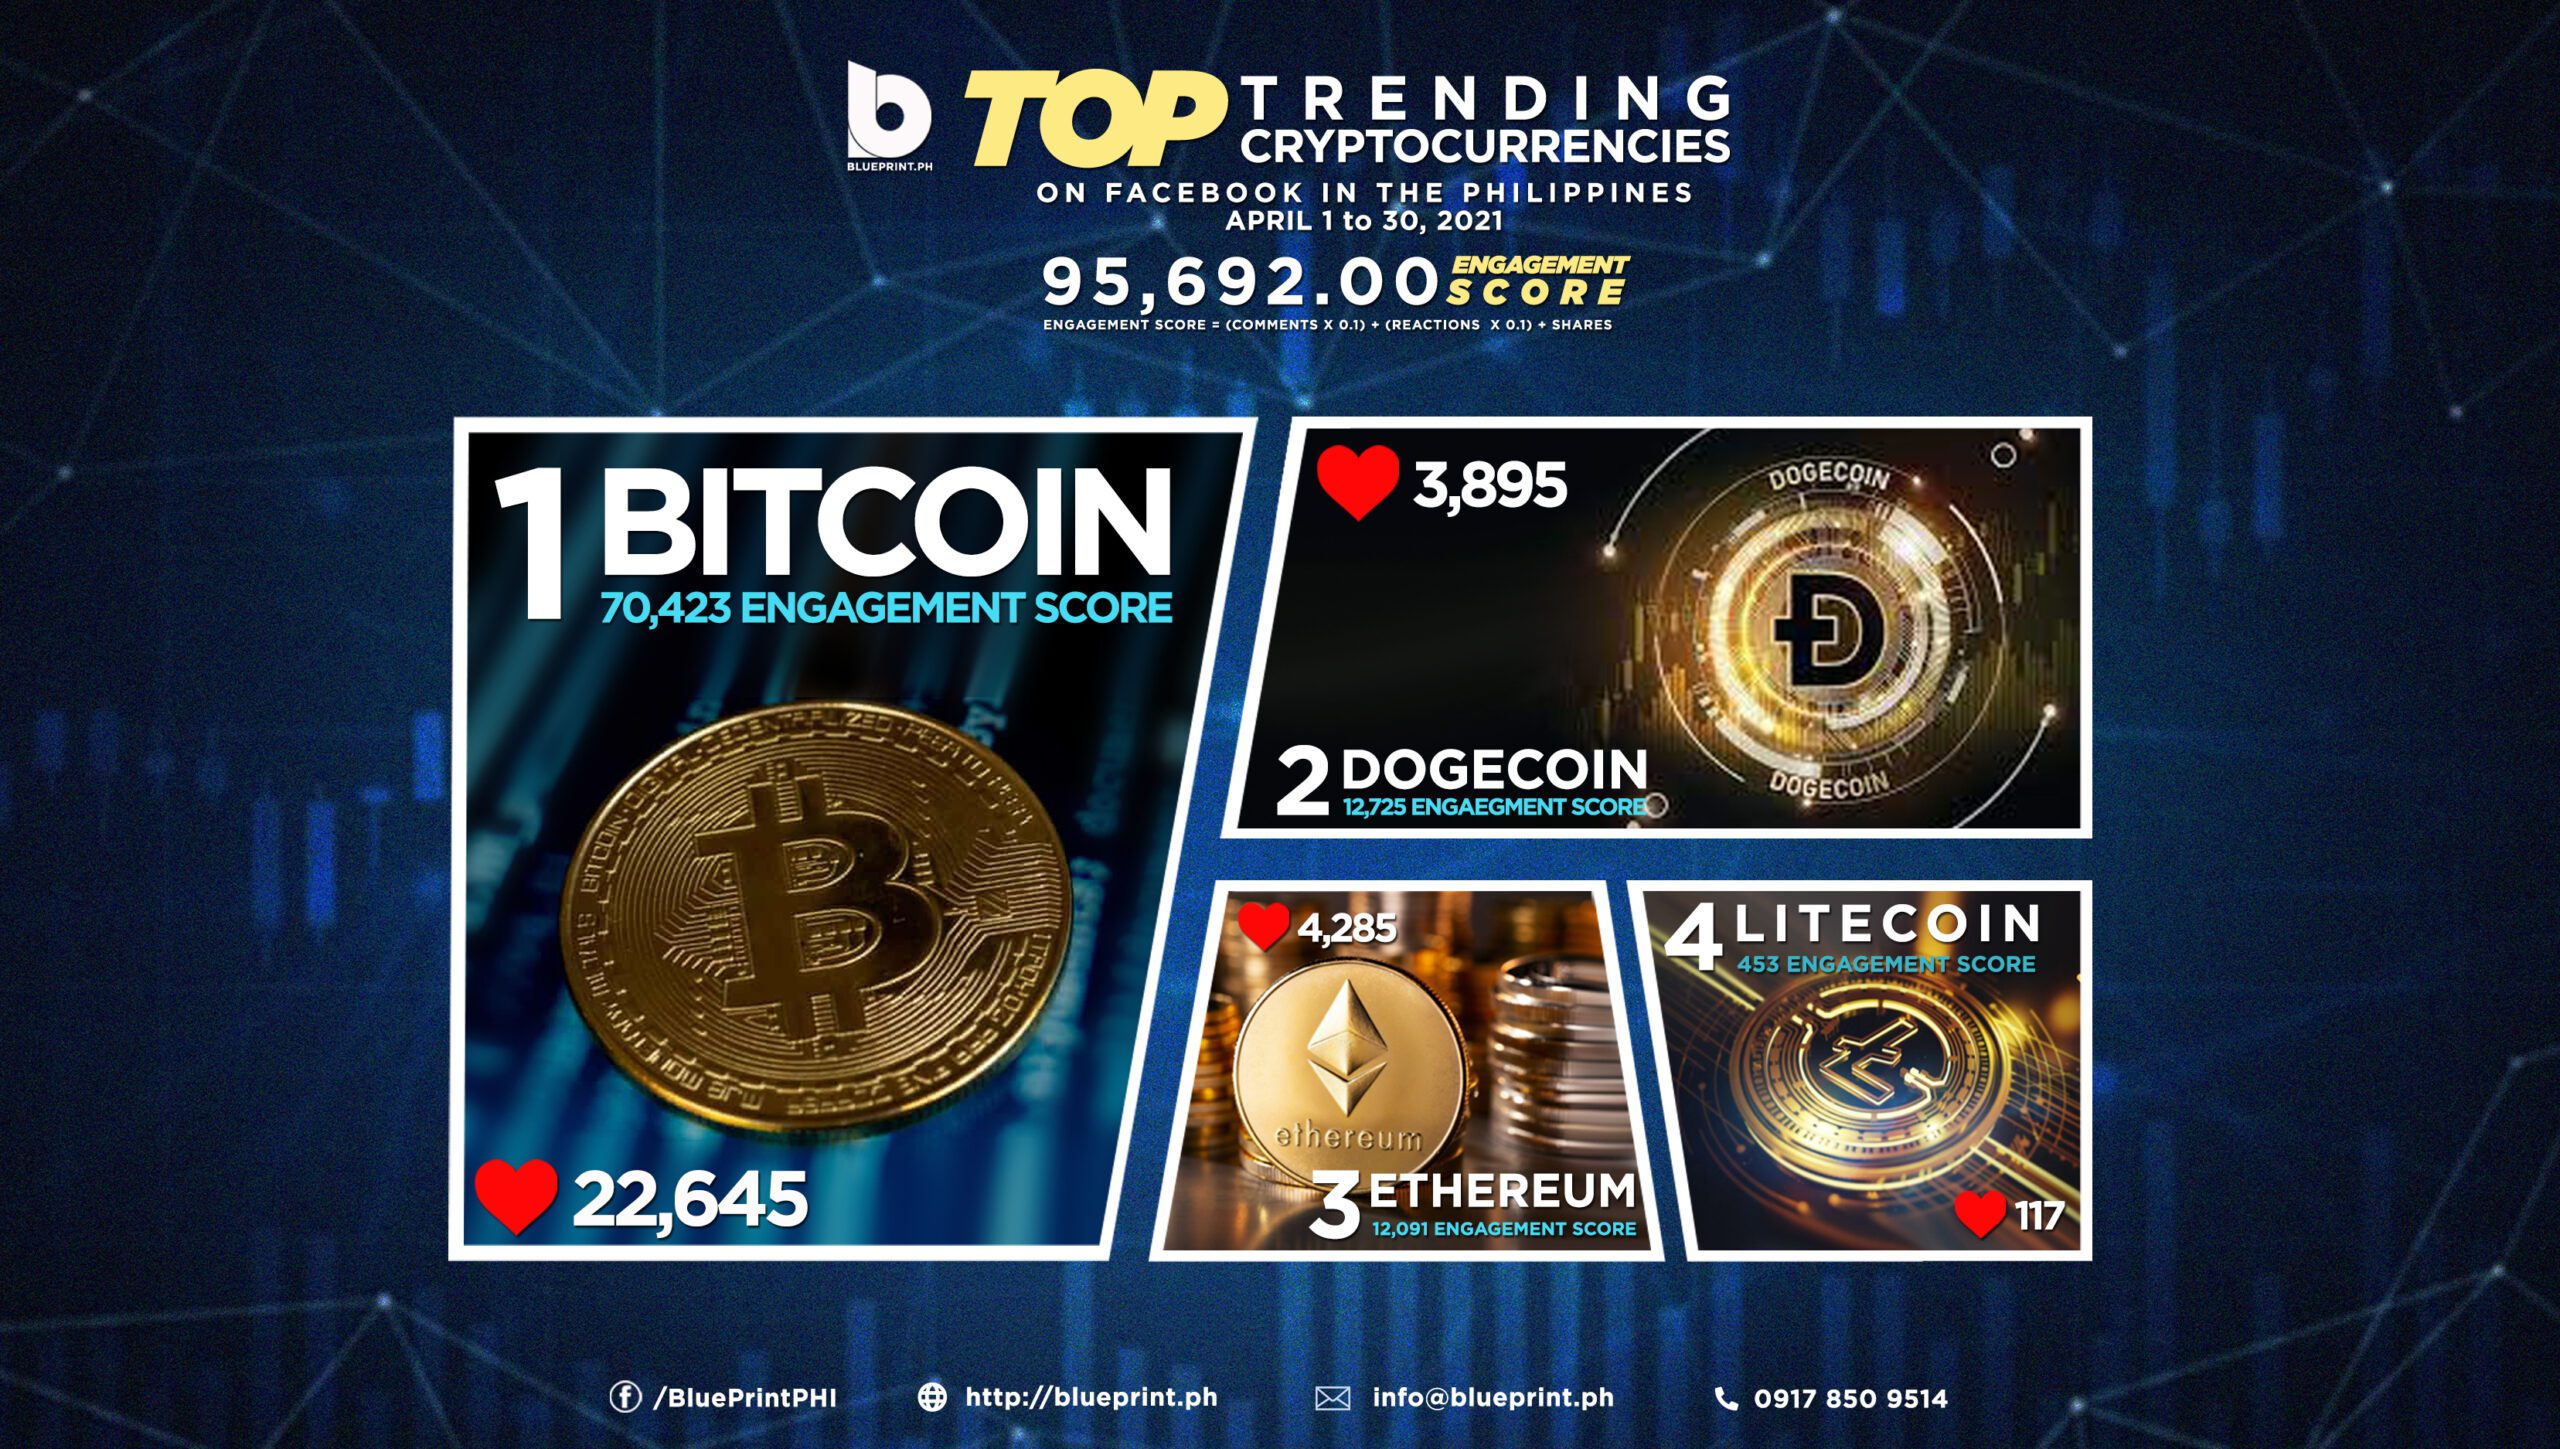 crypto currencies trending